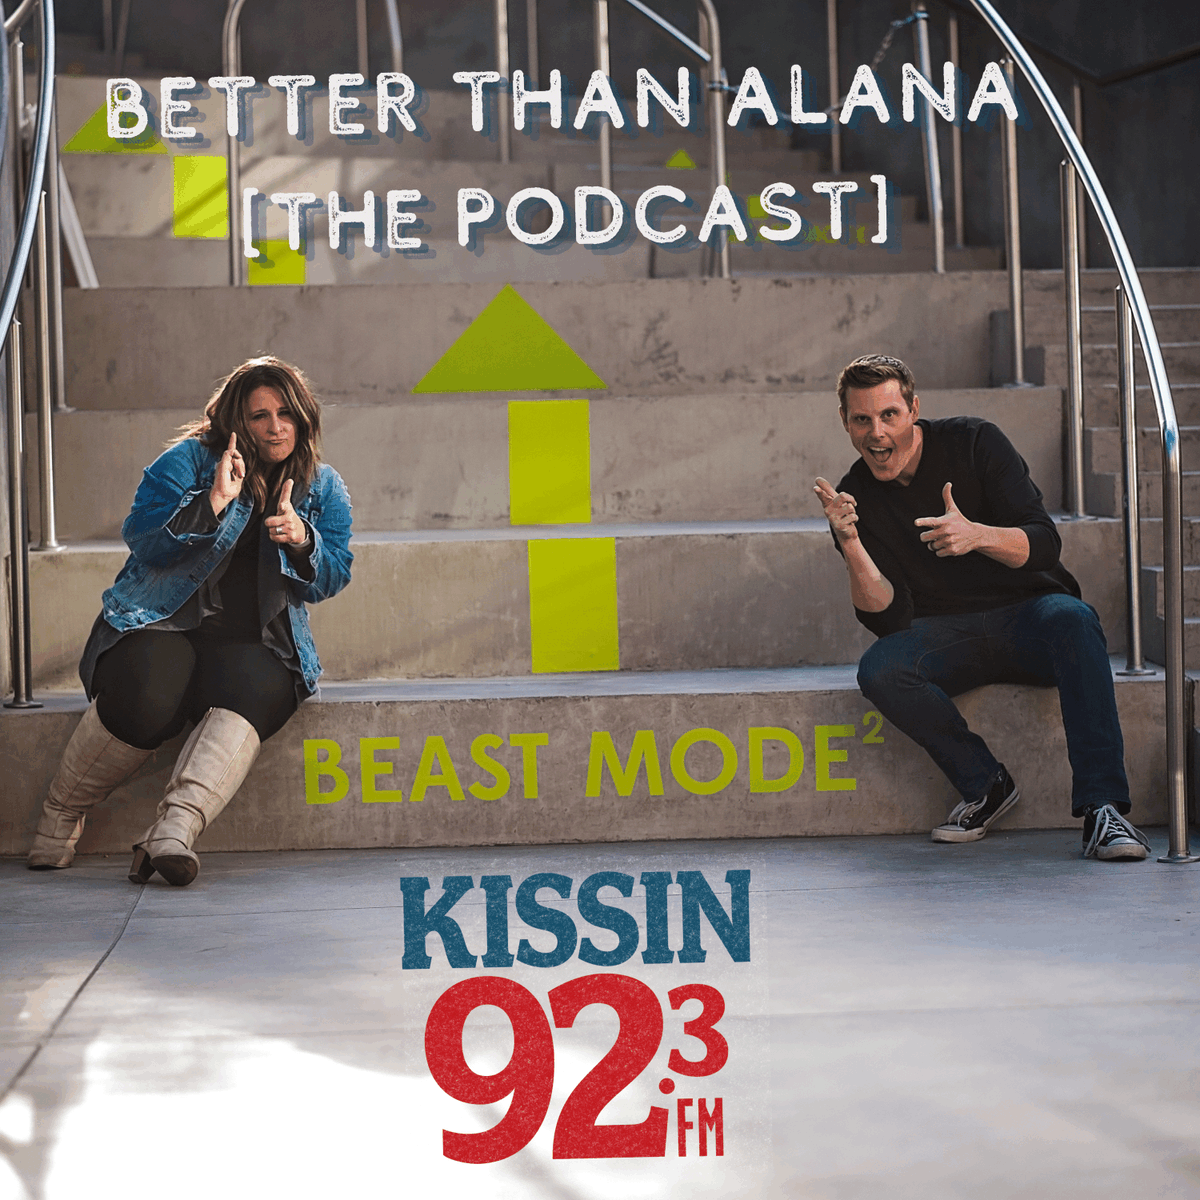 Check out the new Kissin' Podcast here! kizn.com/better-than-al…